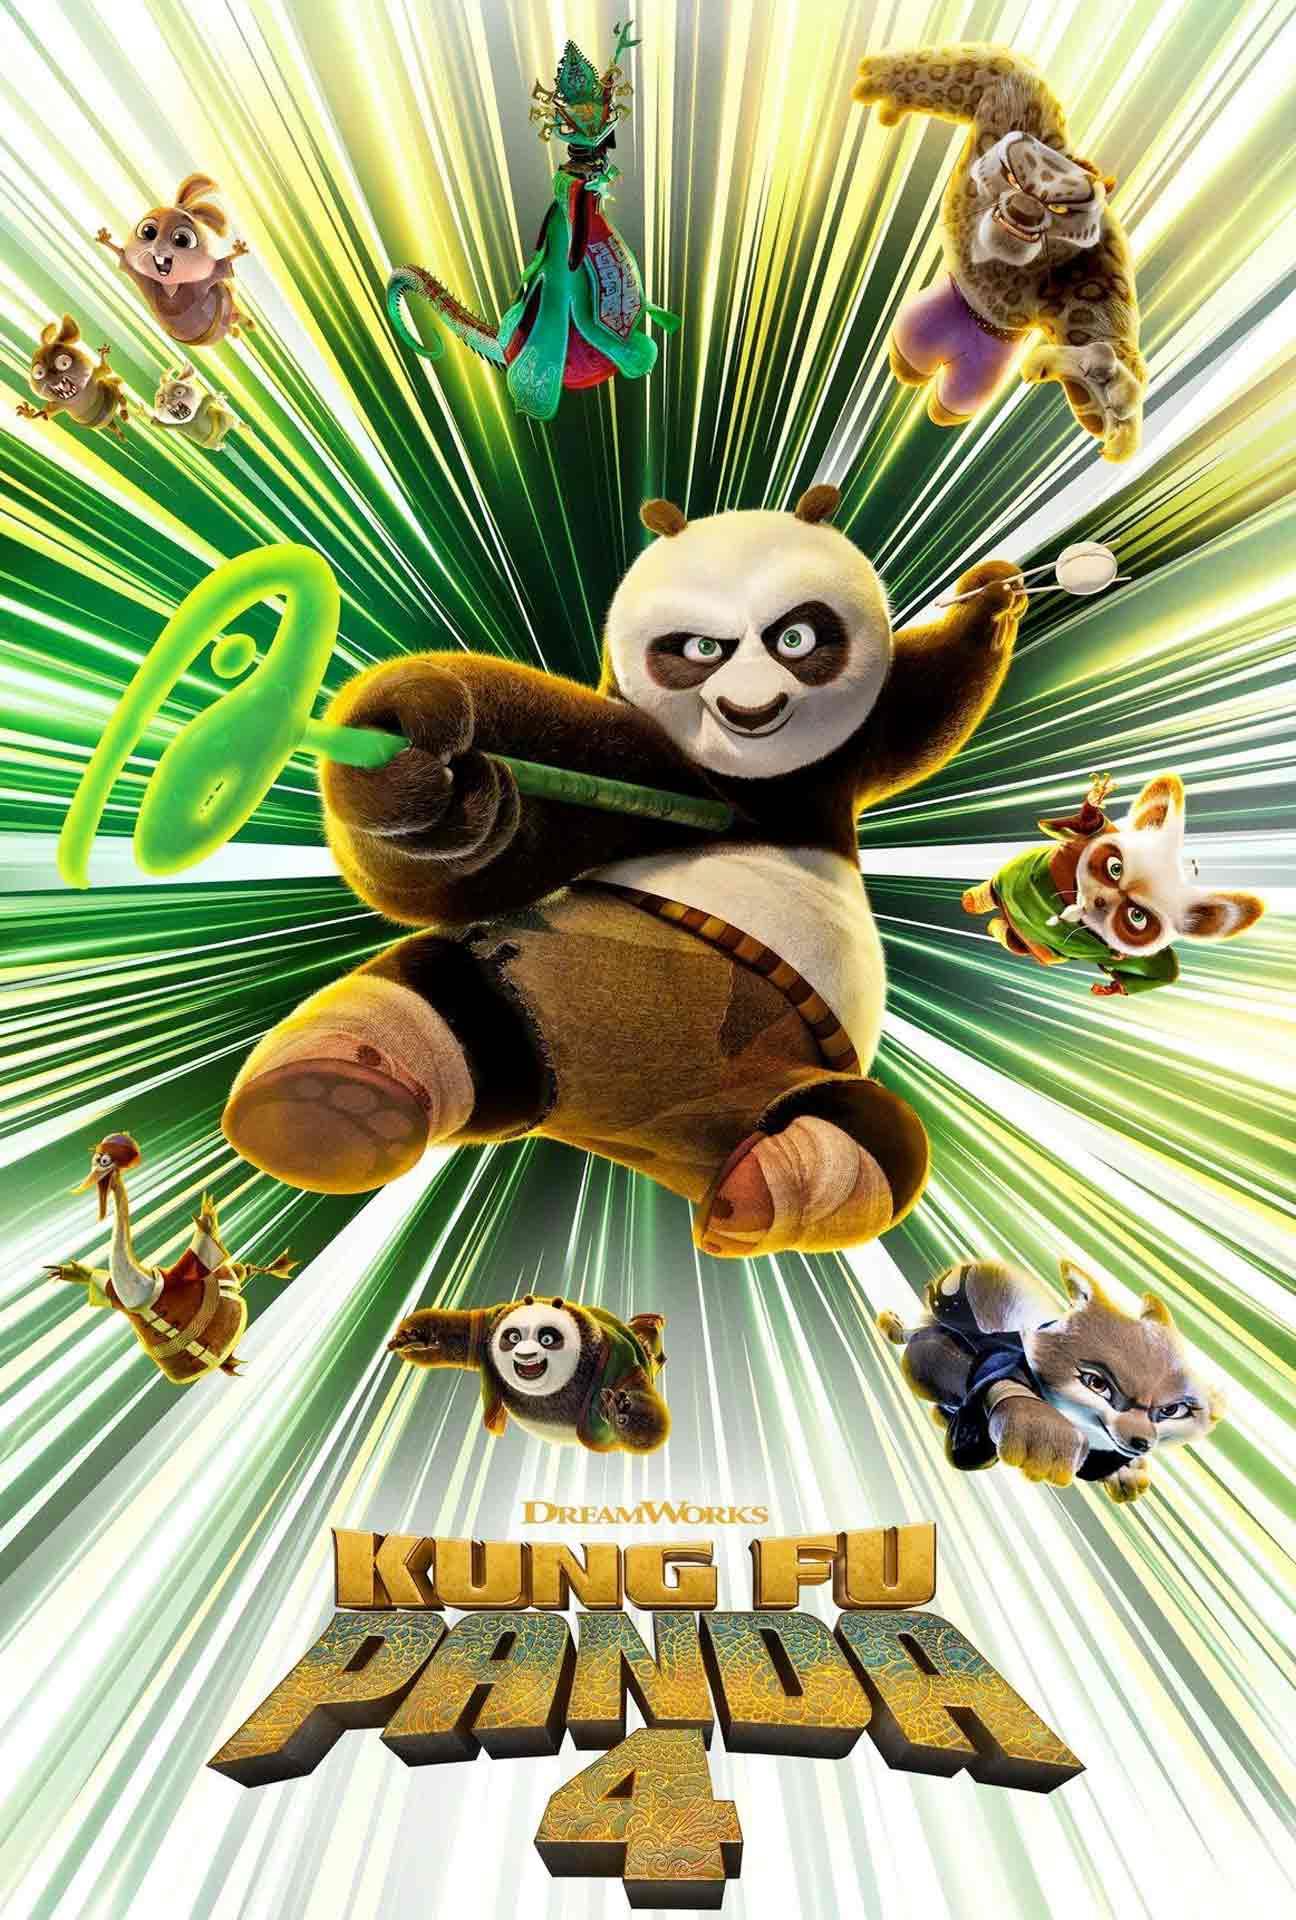 Movie Poster for Kung Fu Panda 4